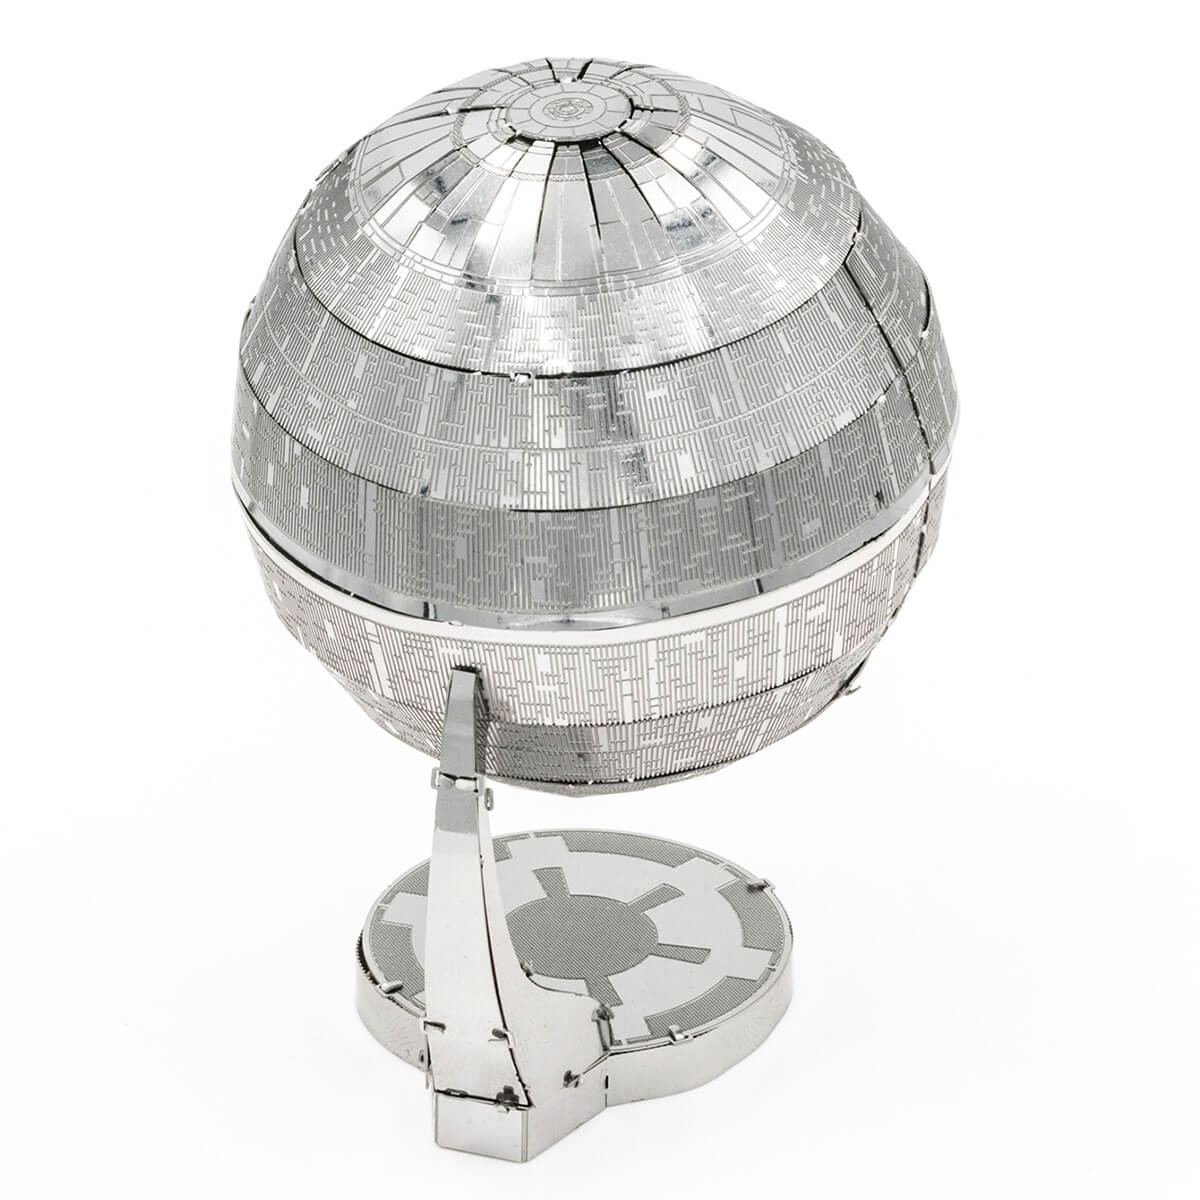 Back view of the death star.